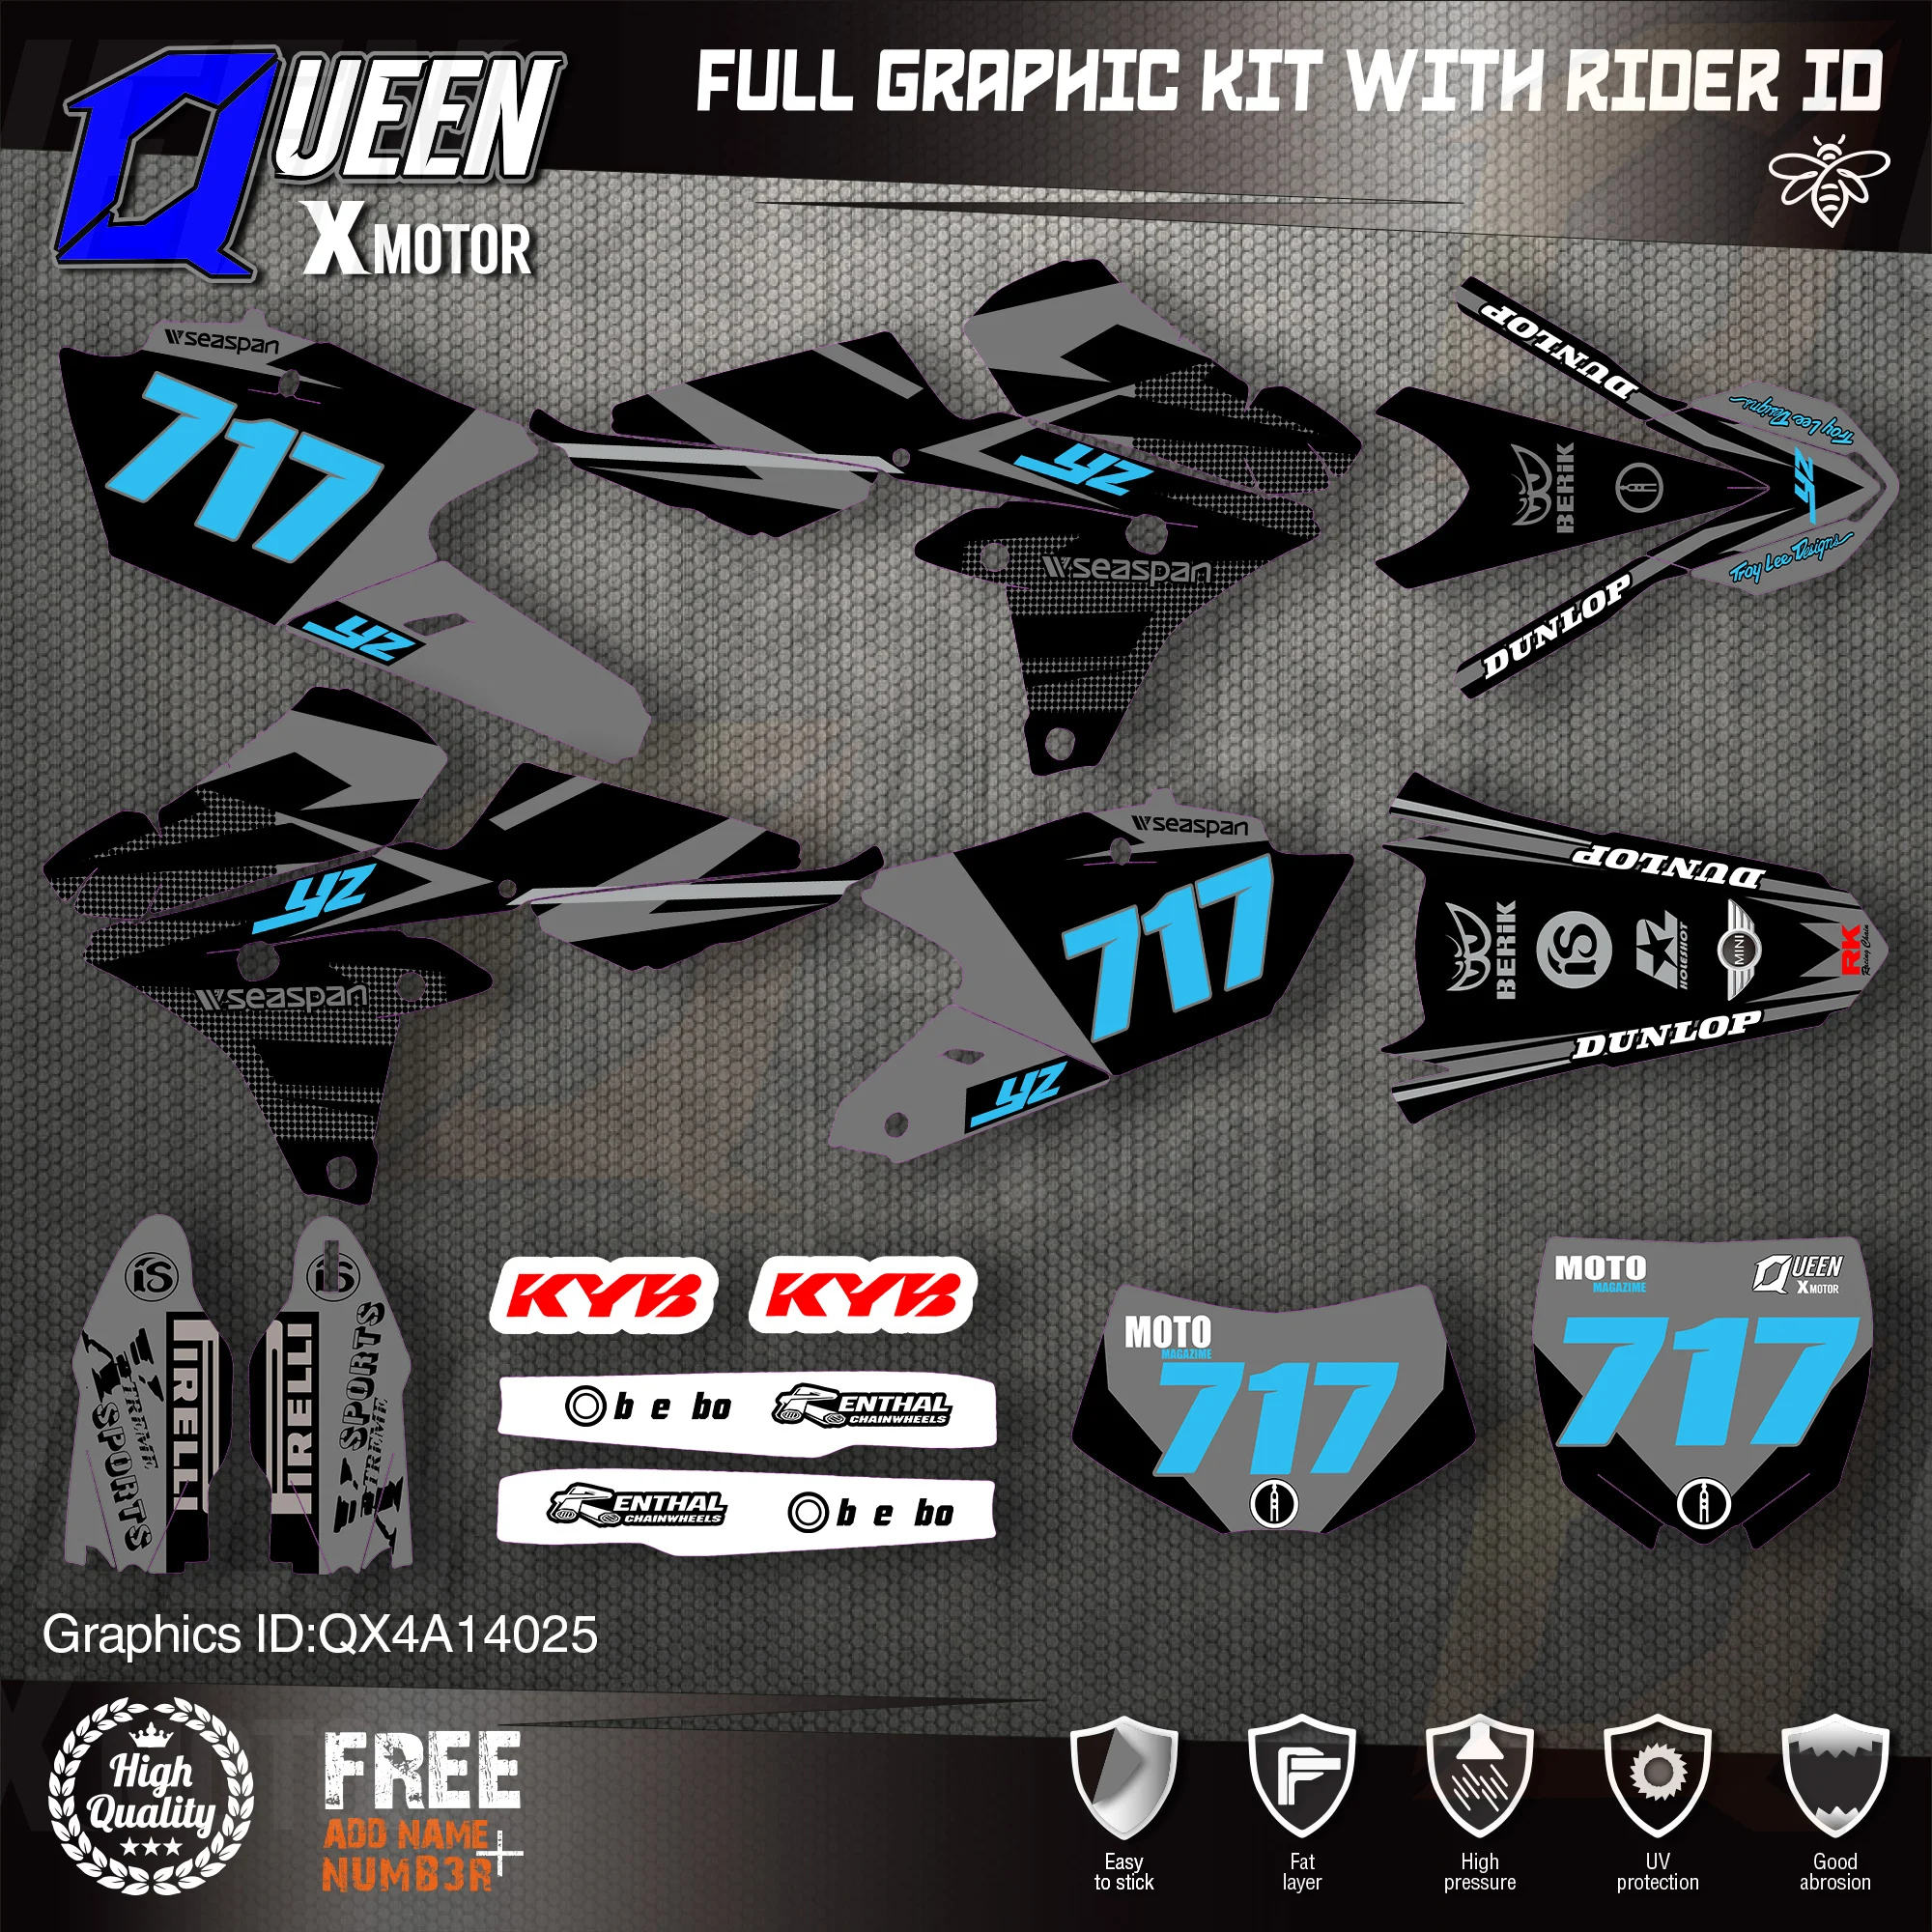 

QUEEN X MOTOR Custom Team Graphics Backgrounds Decals 3M Stickers Kit For YAMAHA 14-18YZ250F 15-18YZ250FX WRF250 14-17YZ450F 025